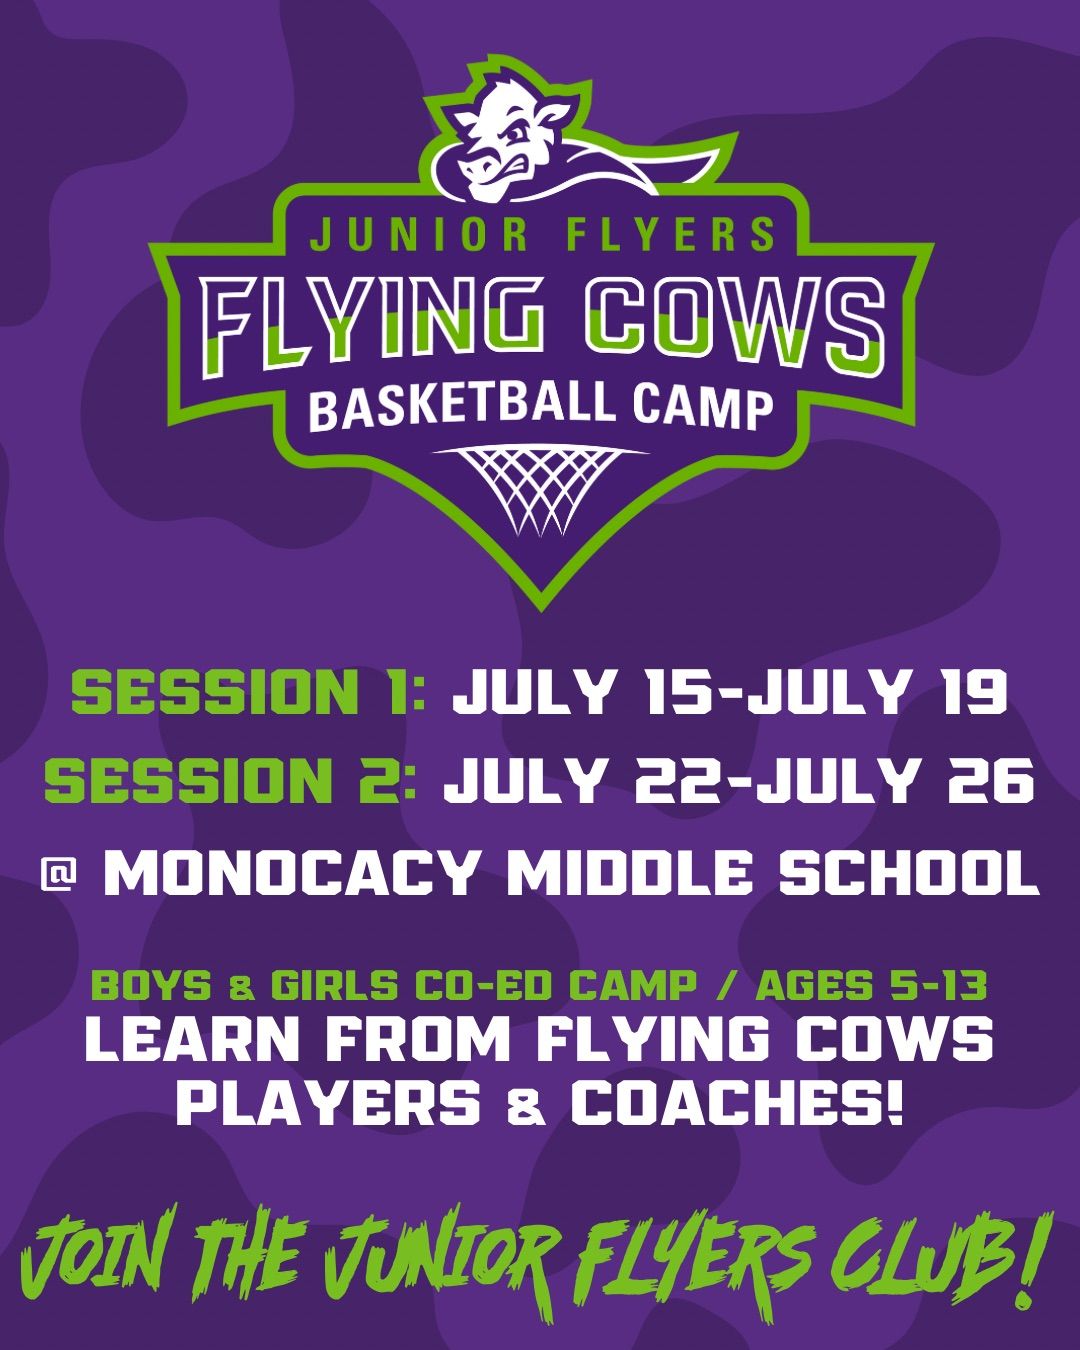 Flying Cows Junior Flyers Youth Basketball Camp